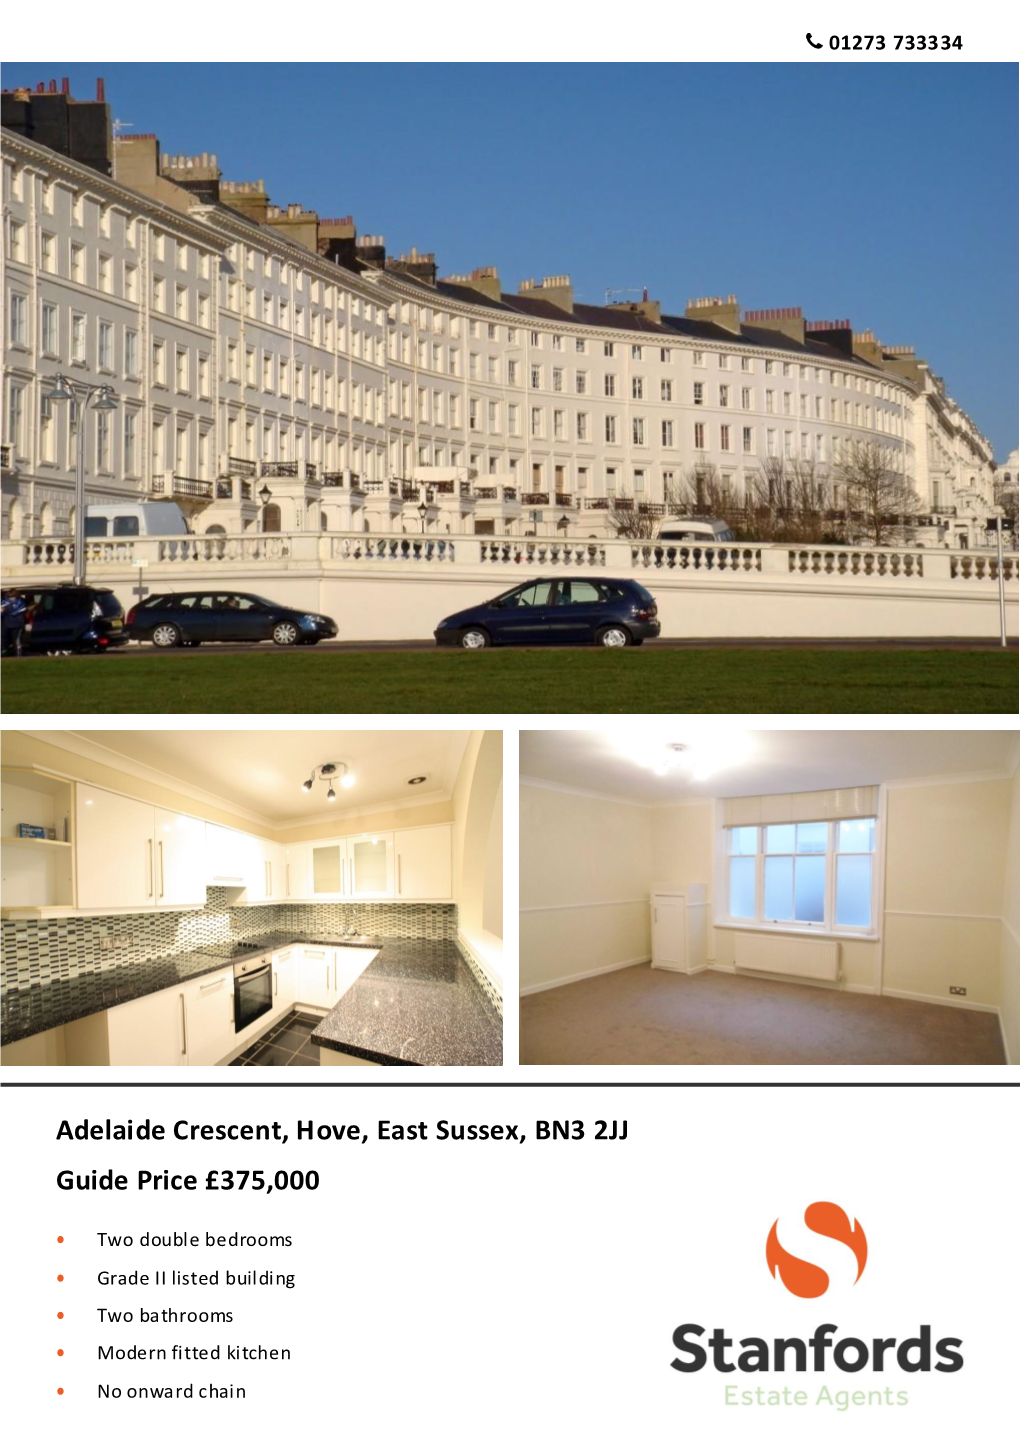 Guide Price £375,000 Adelaide Crescent, Hove, East Sussex, BN3